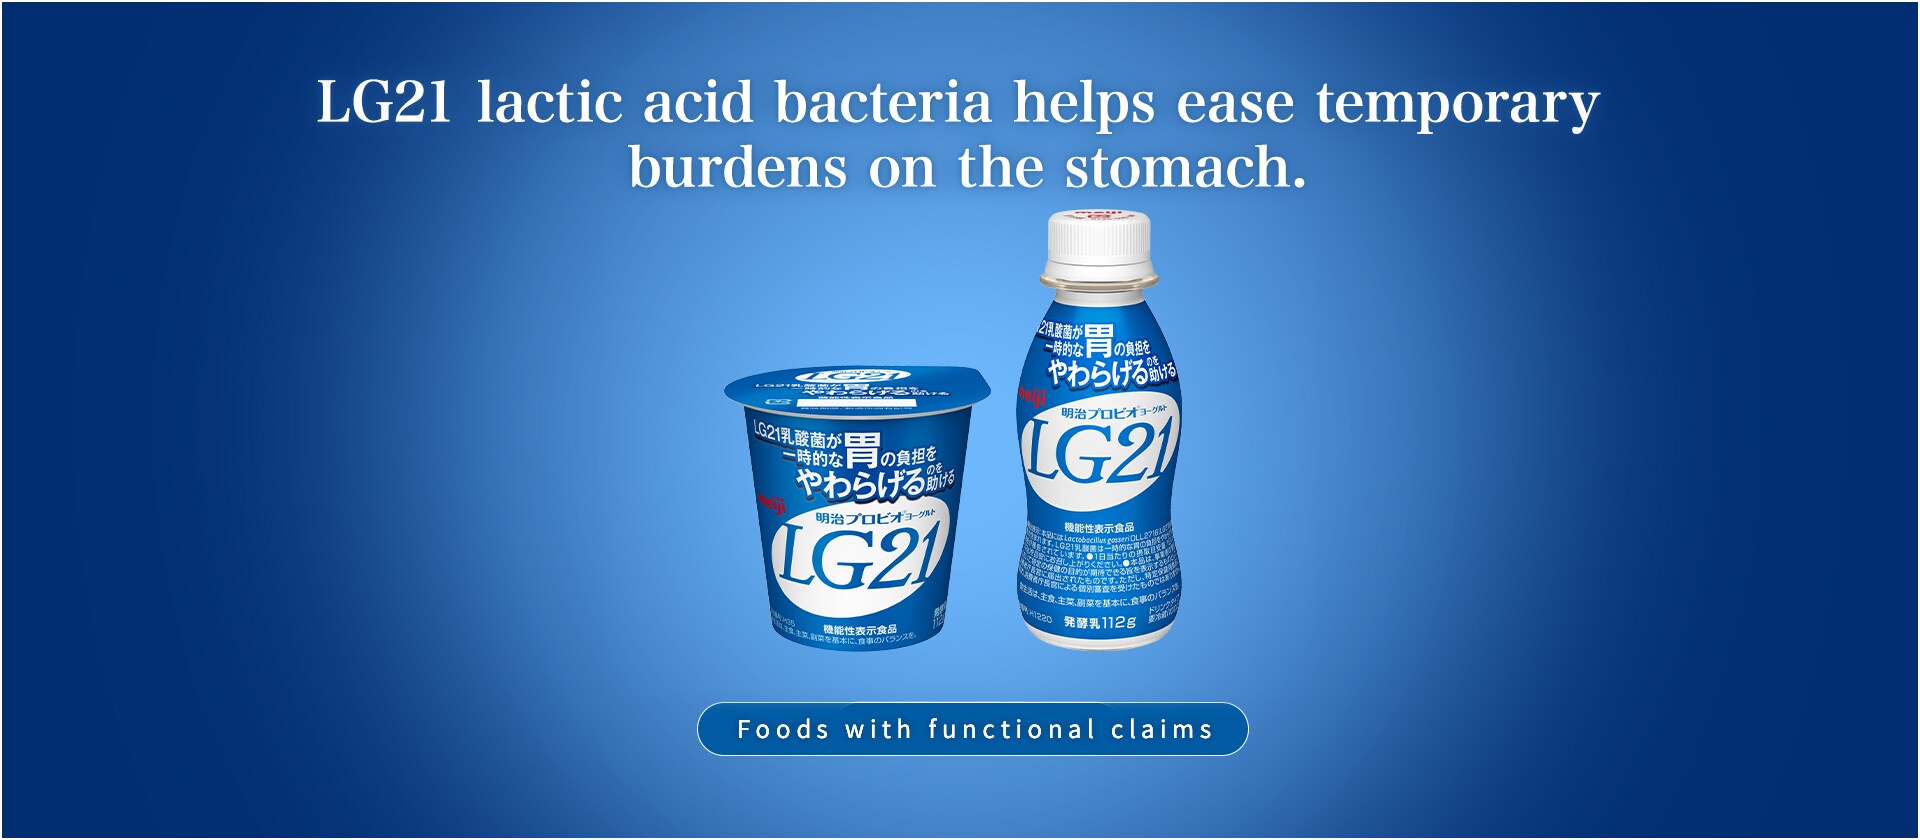 Lactic acid bacteria that work in the stomach LG21 The expression “lactic acid bacteria that work in the stomach” is used to describe the feature of bacteria that they can withstand and stay alive in the stomach and propagate better there. The term “work” denotes such bacterial activity.